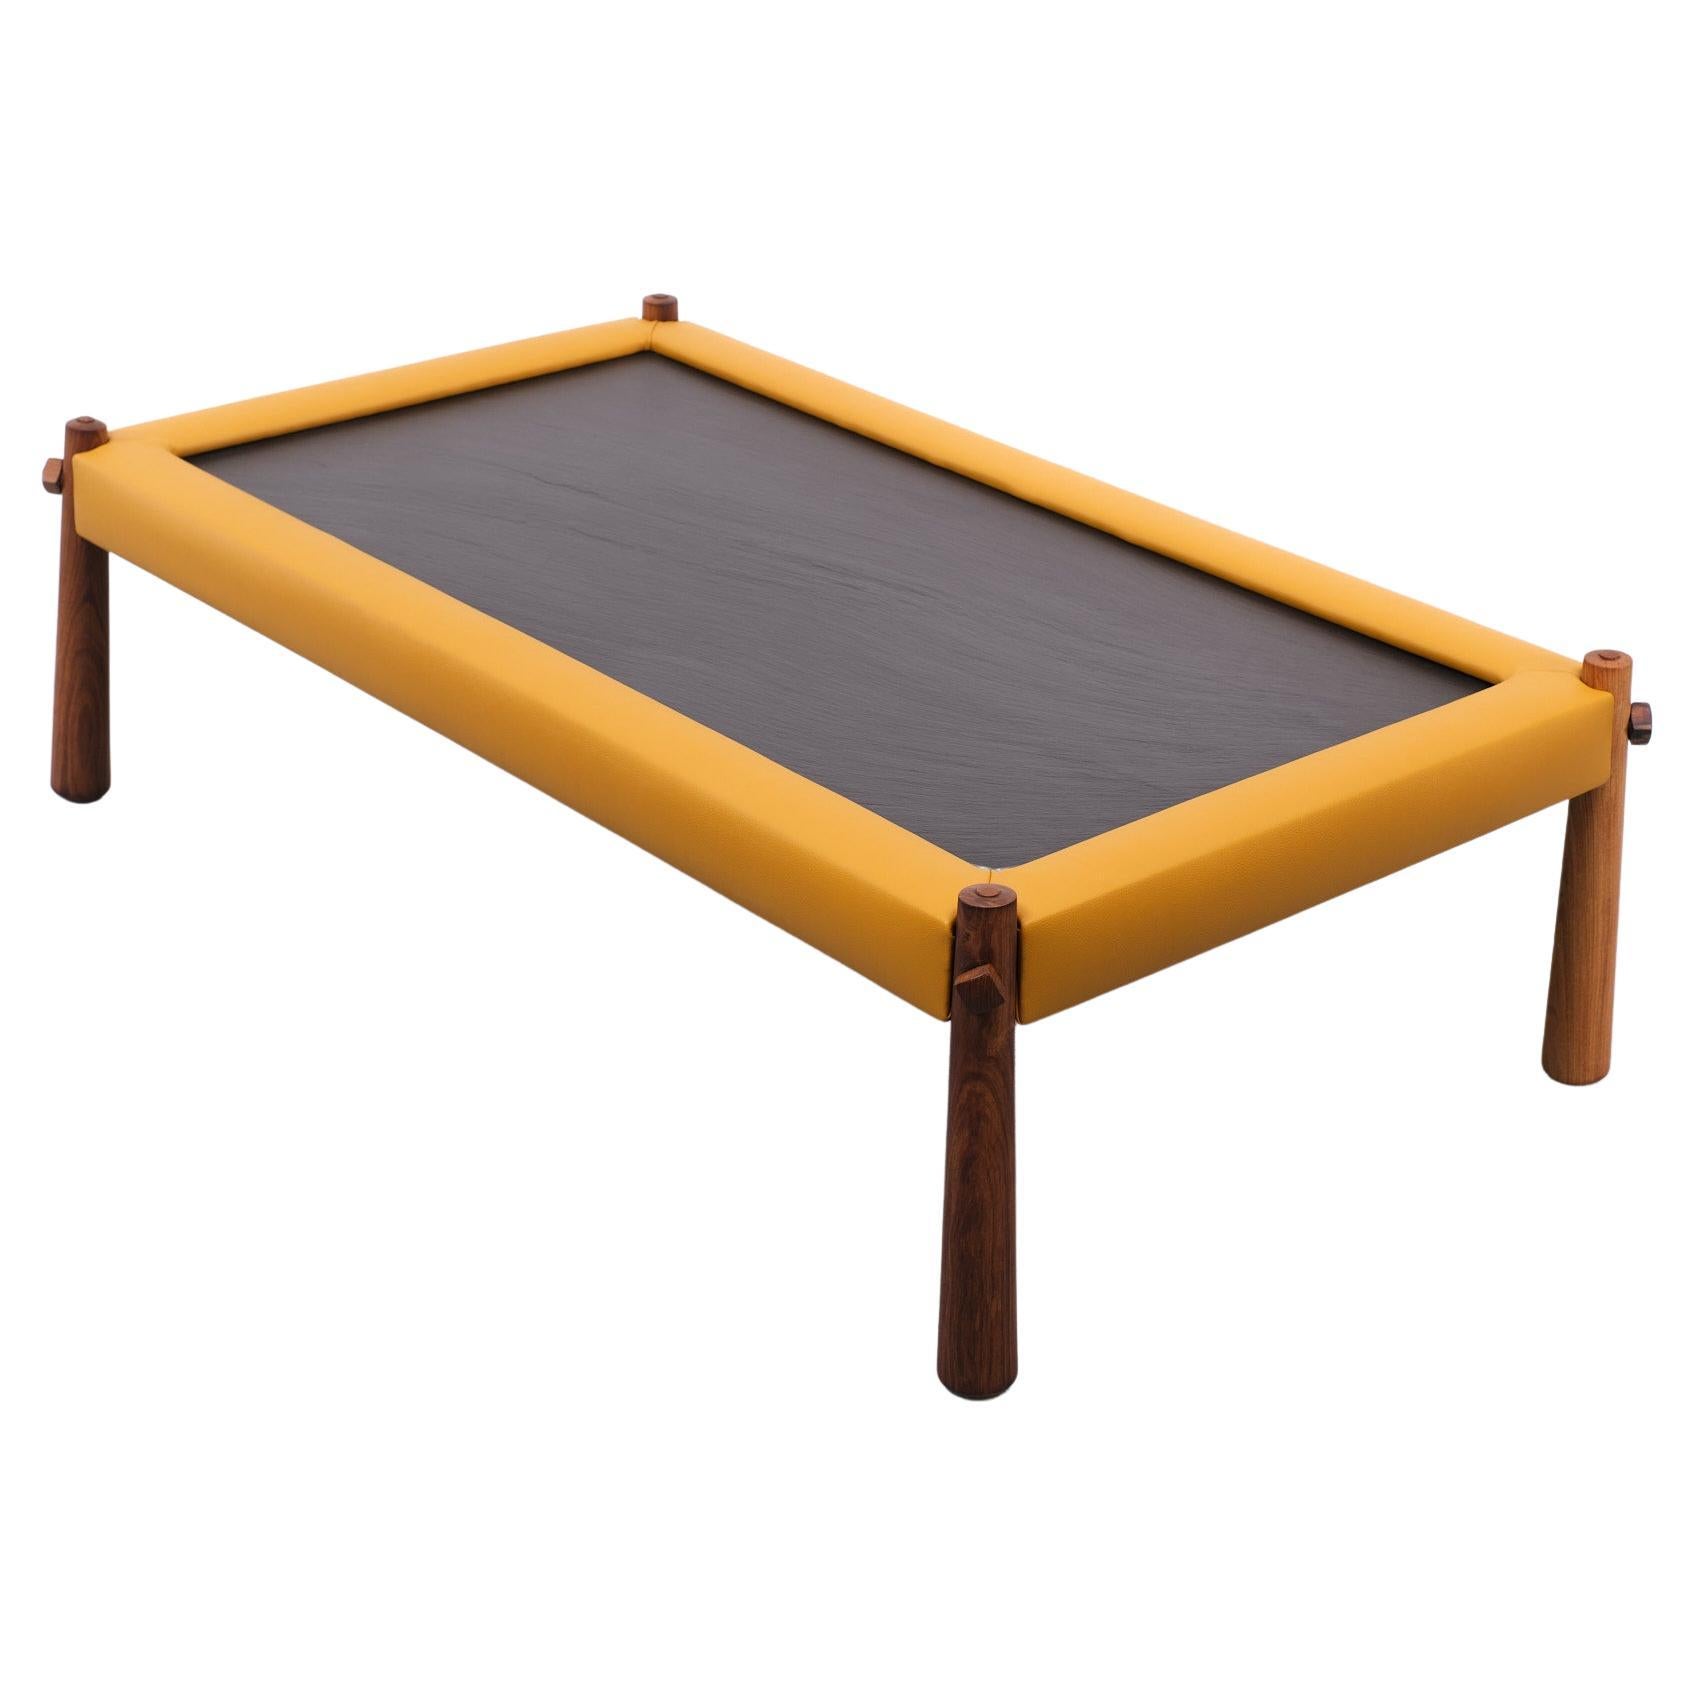 Beautiful Percival Lever Coffee table Newly upholstered Mustard Yellow color frame ,comes with a thick Solid Slate top. and is standing on solid Jacaranda wood legs. 
Stunning good looking table.